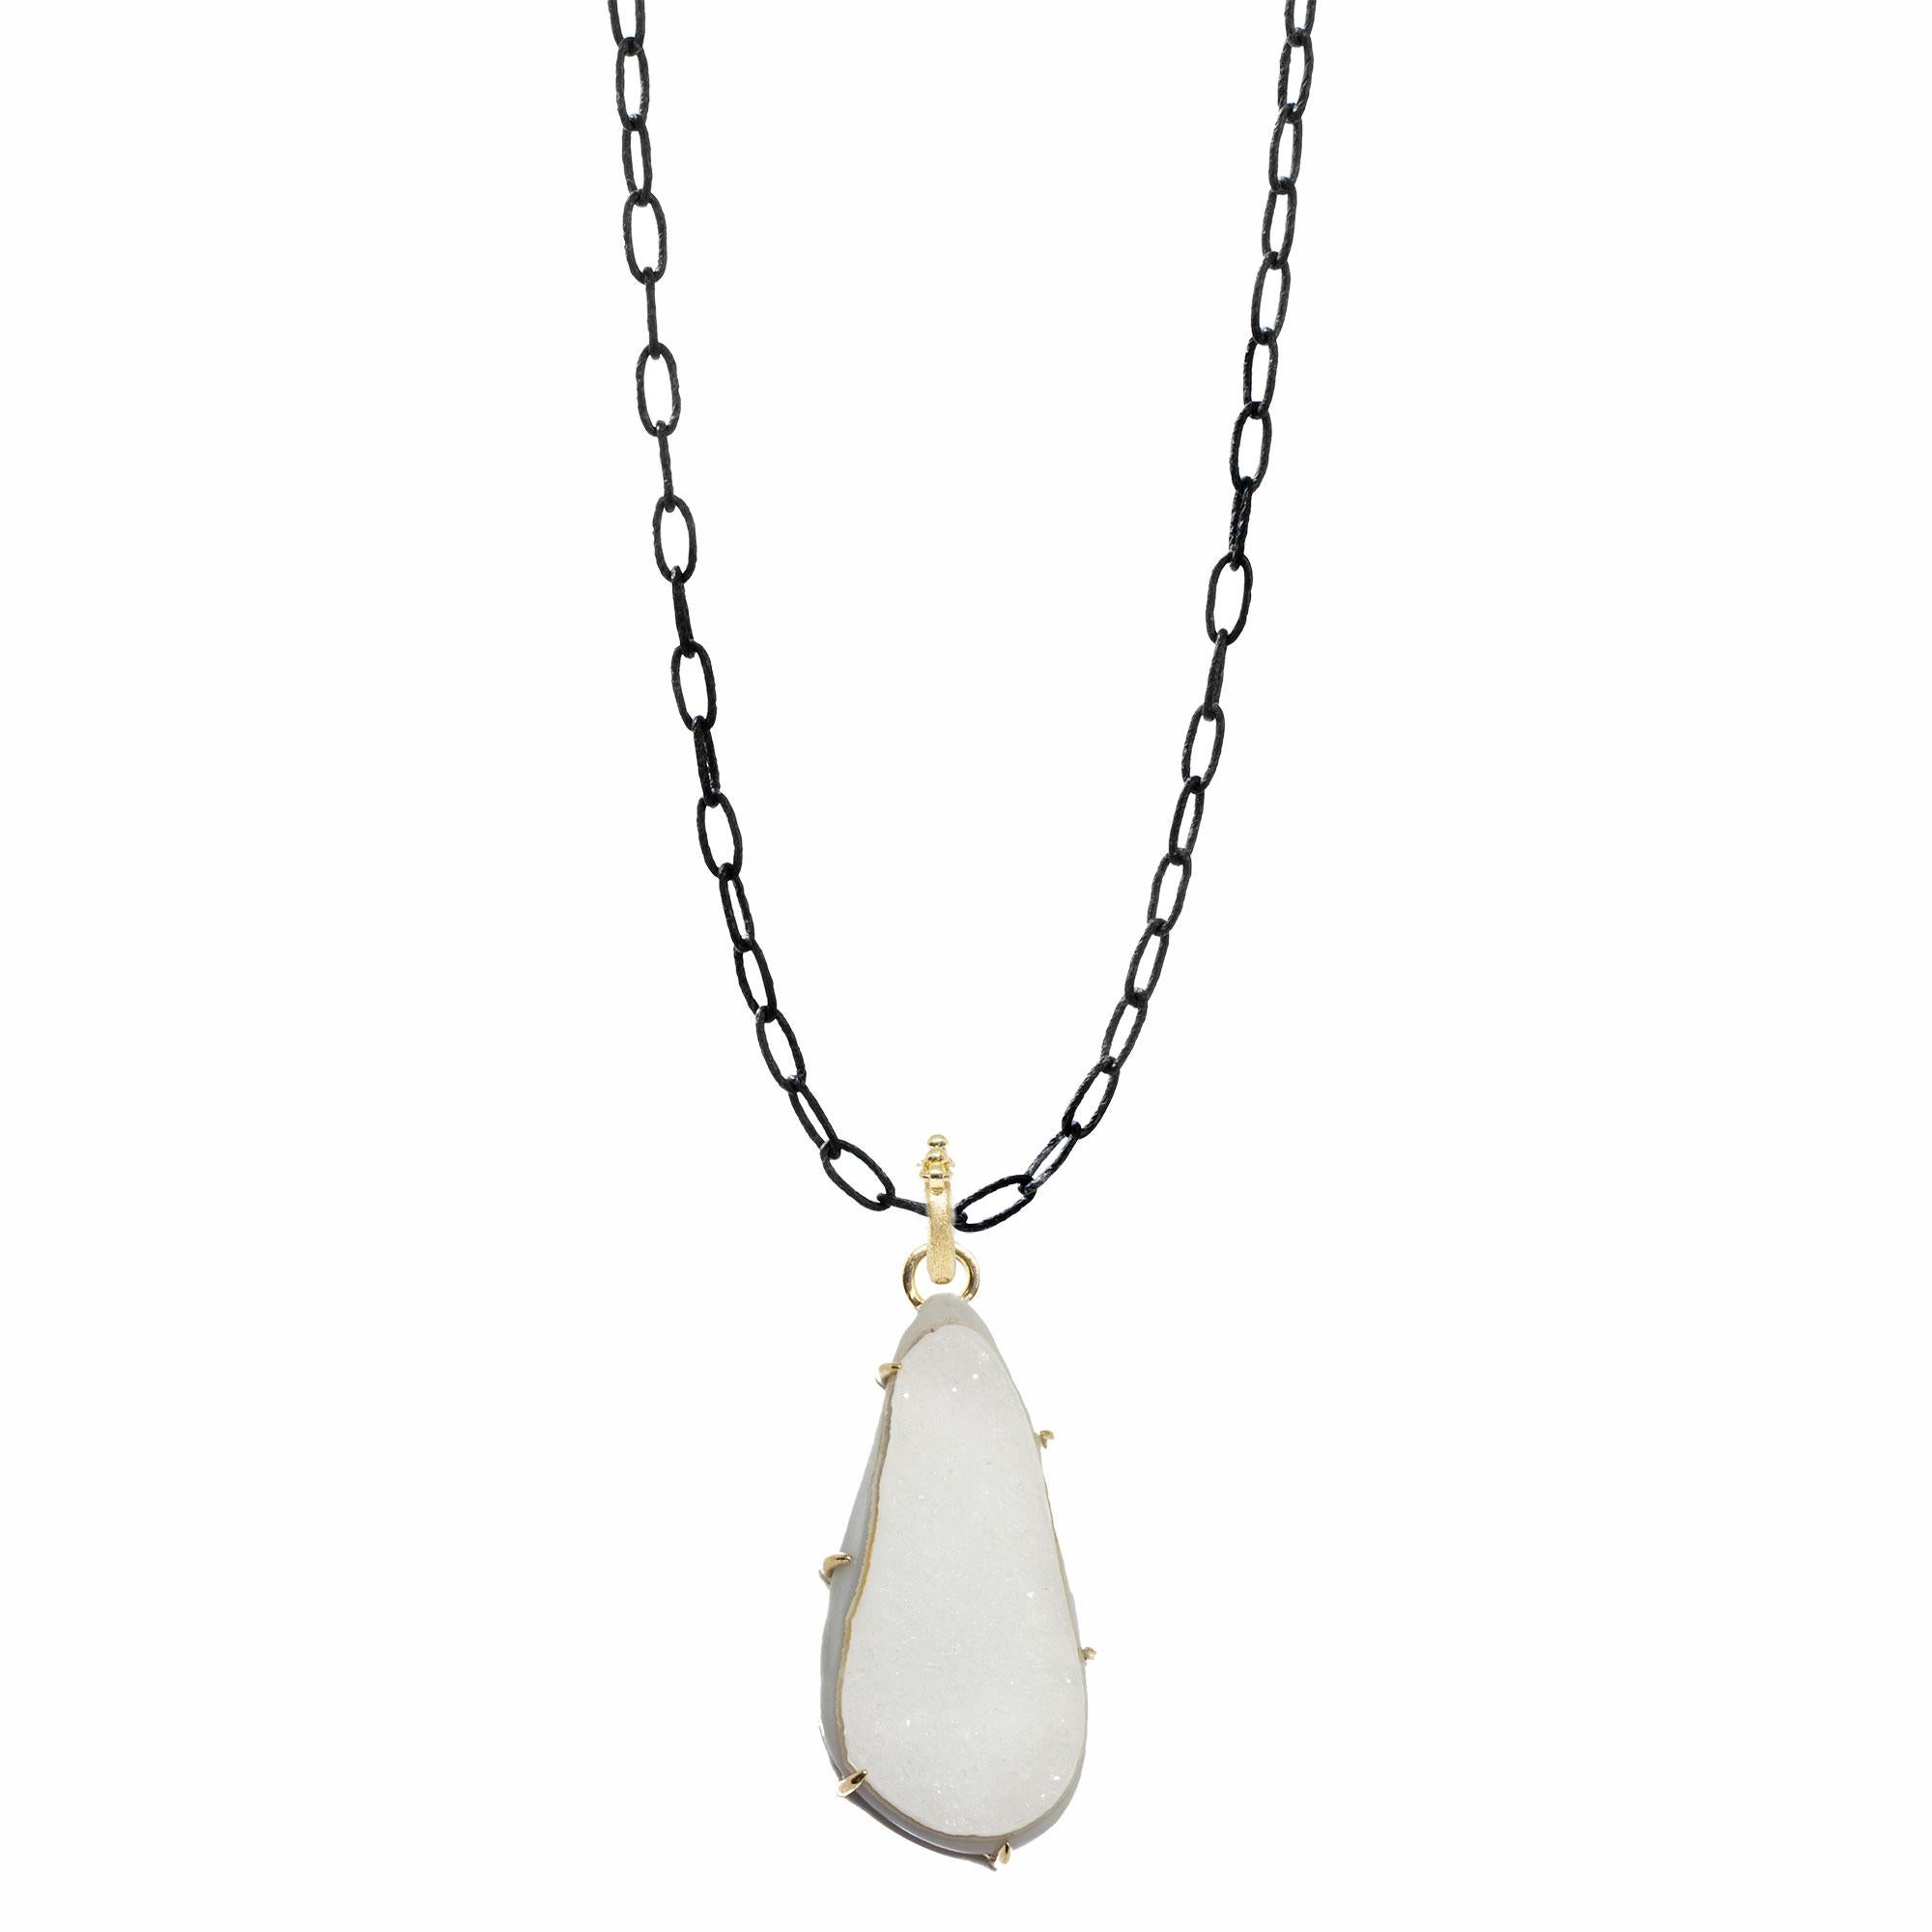 The black oxidized sterling silver neckalace chain is the perfect fit to showcase the vibrant pinnacle white druzy pendant, the Pinnacle Medium White Druzy Silver Necklace is bold and brilliant, a gorgeous  style you can dress up or down on the